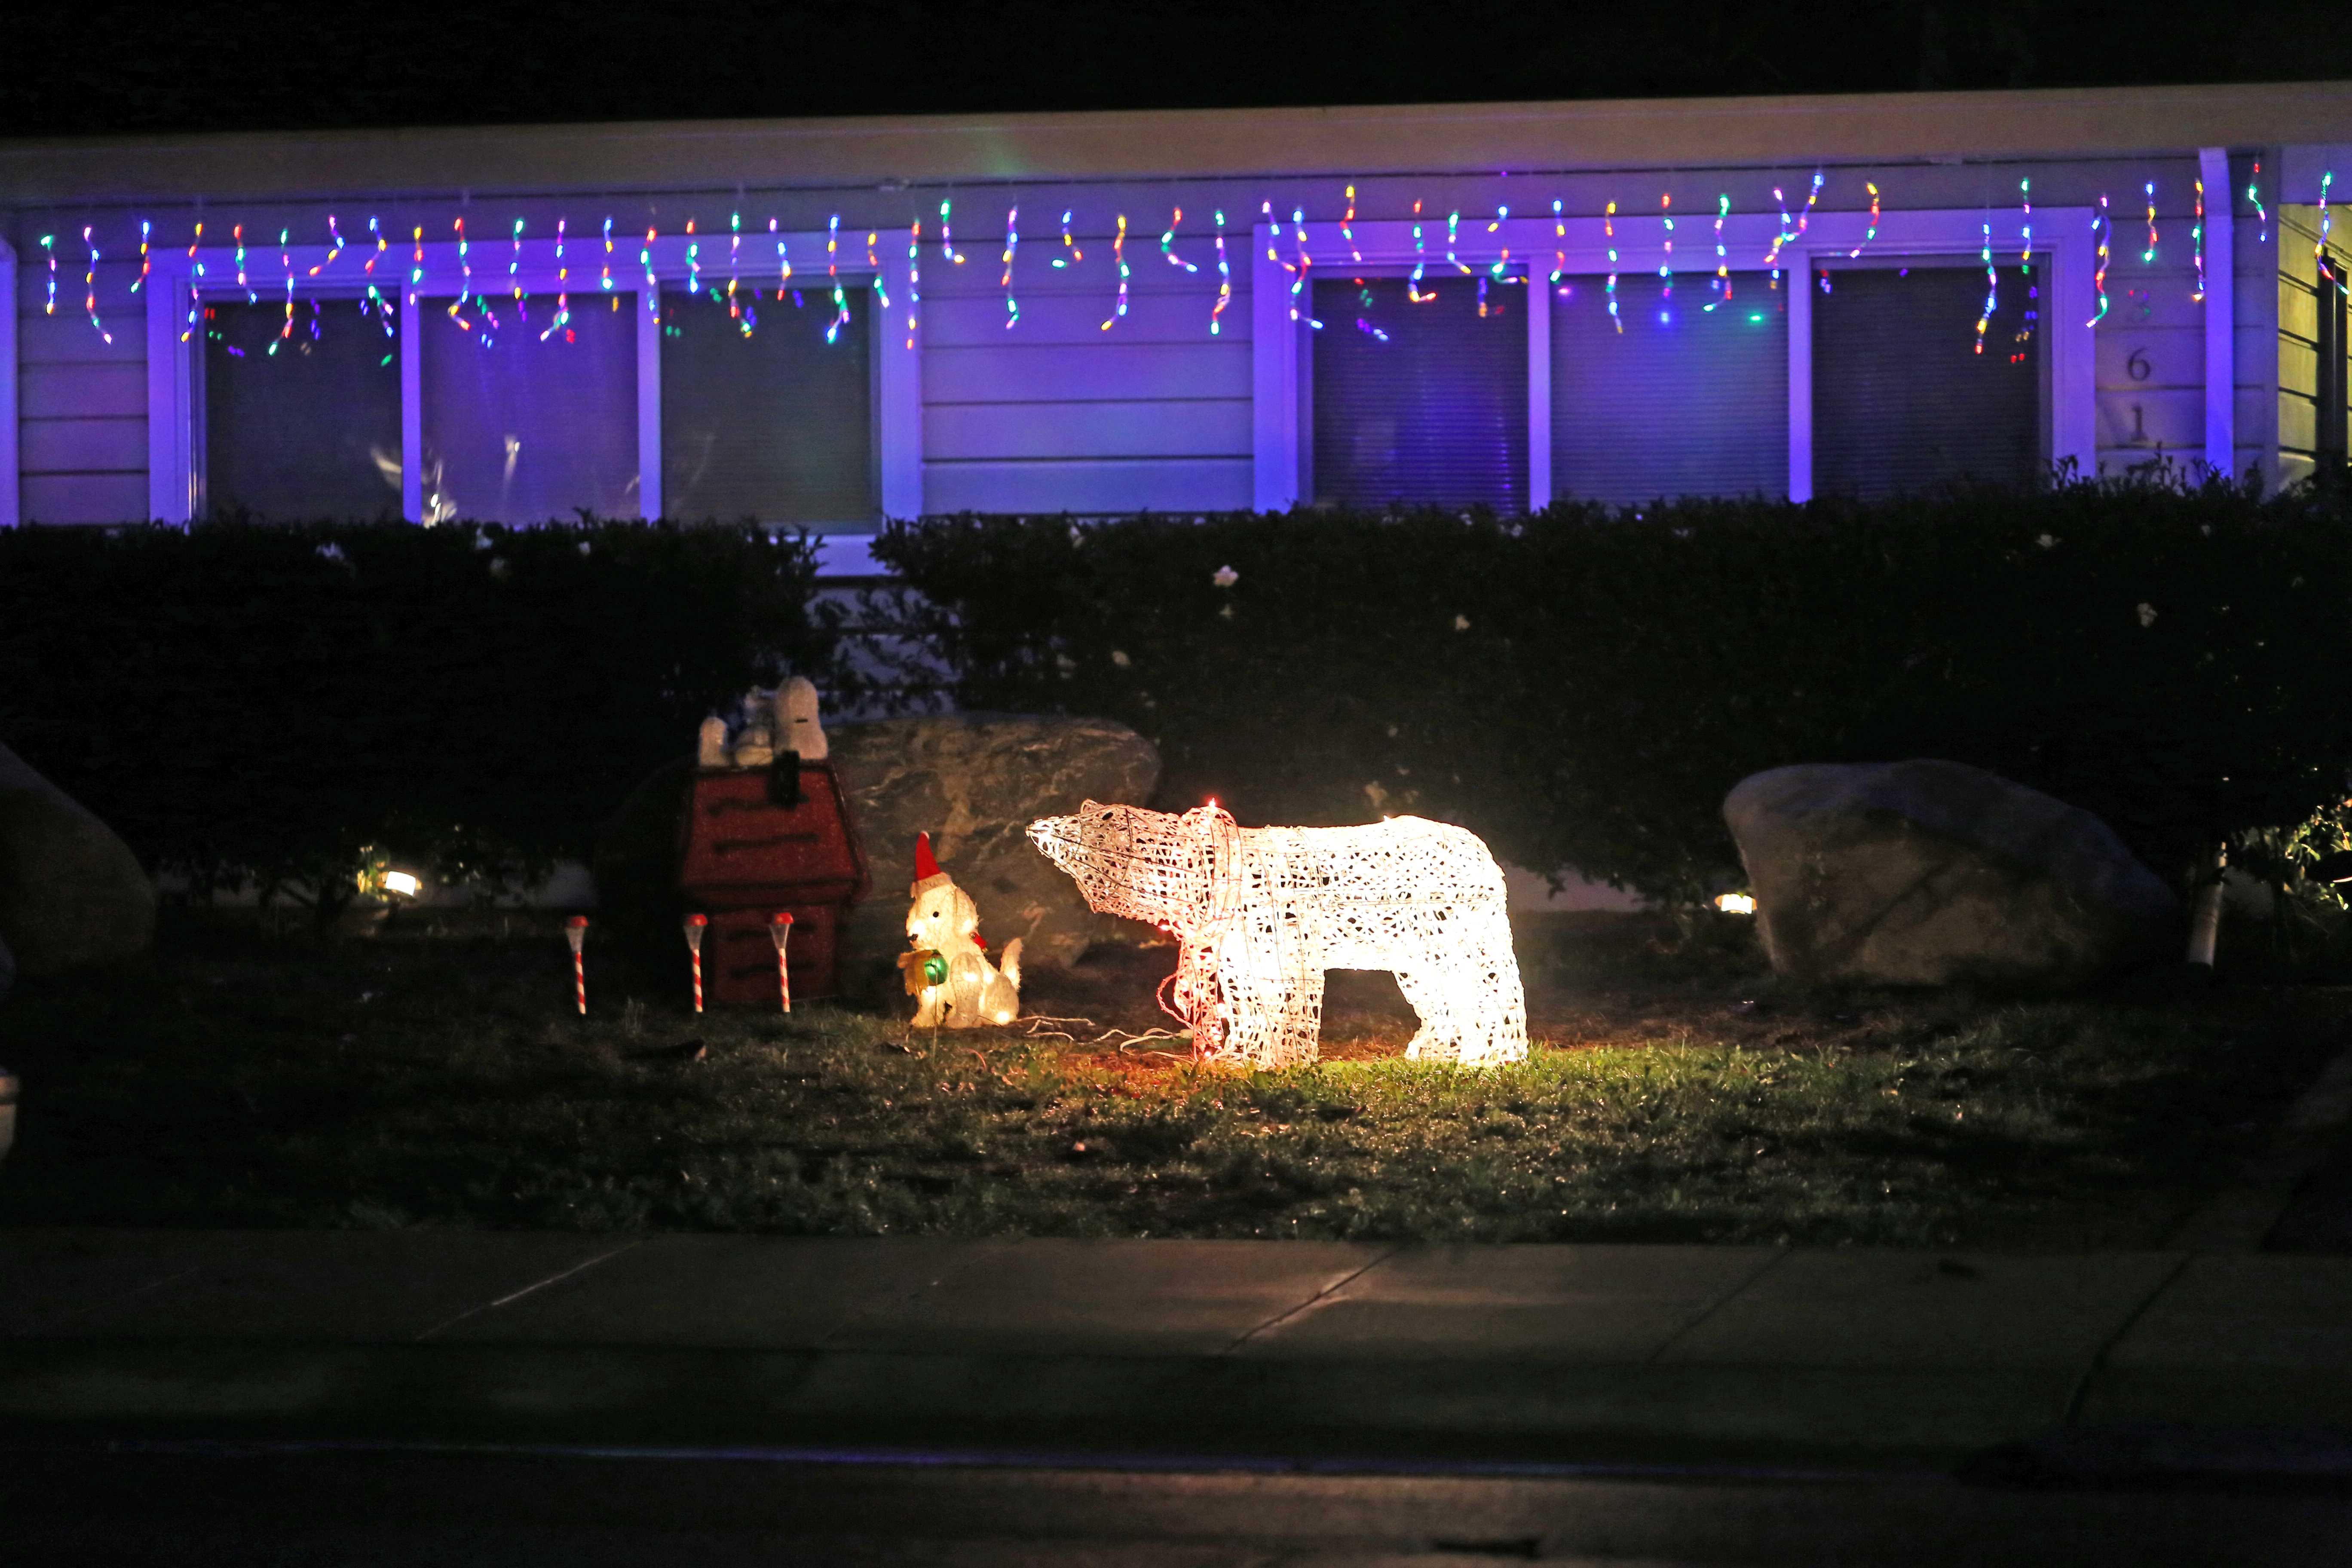 A house in Palo Alto is decorated for Christmas.